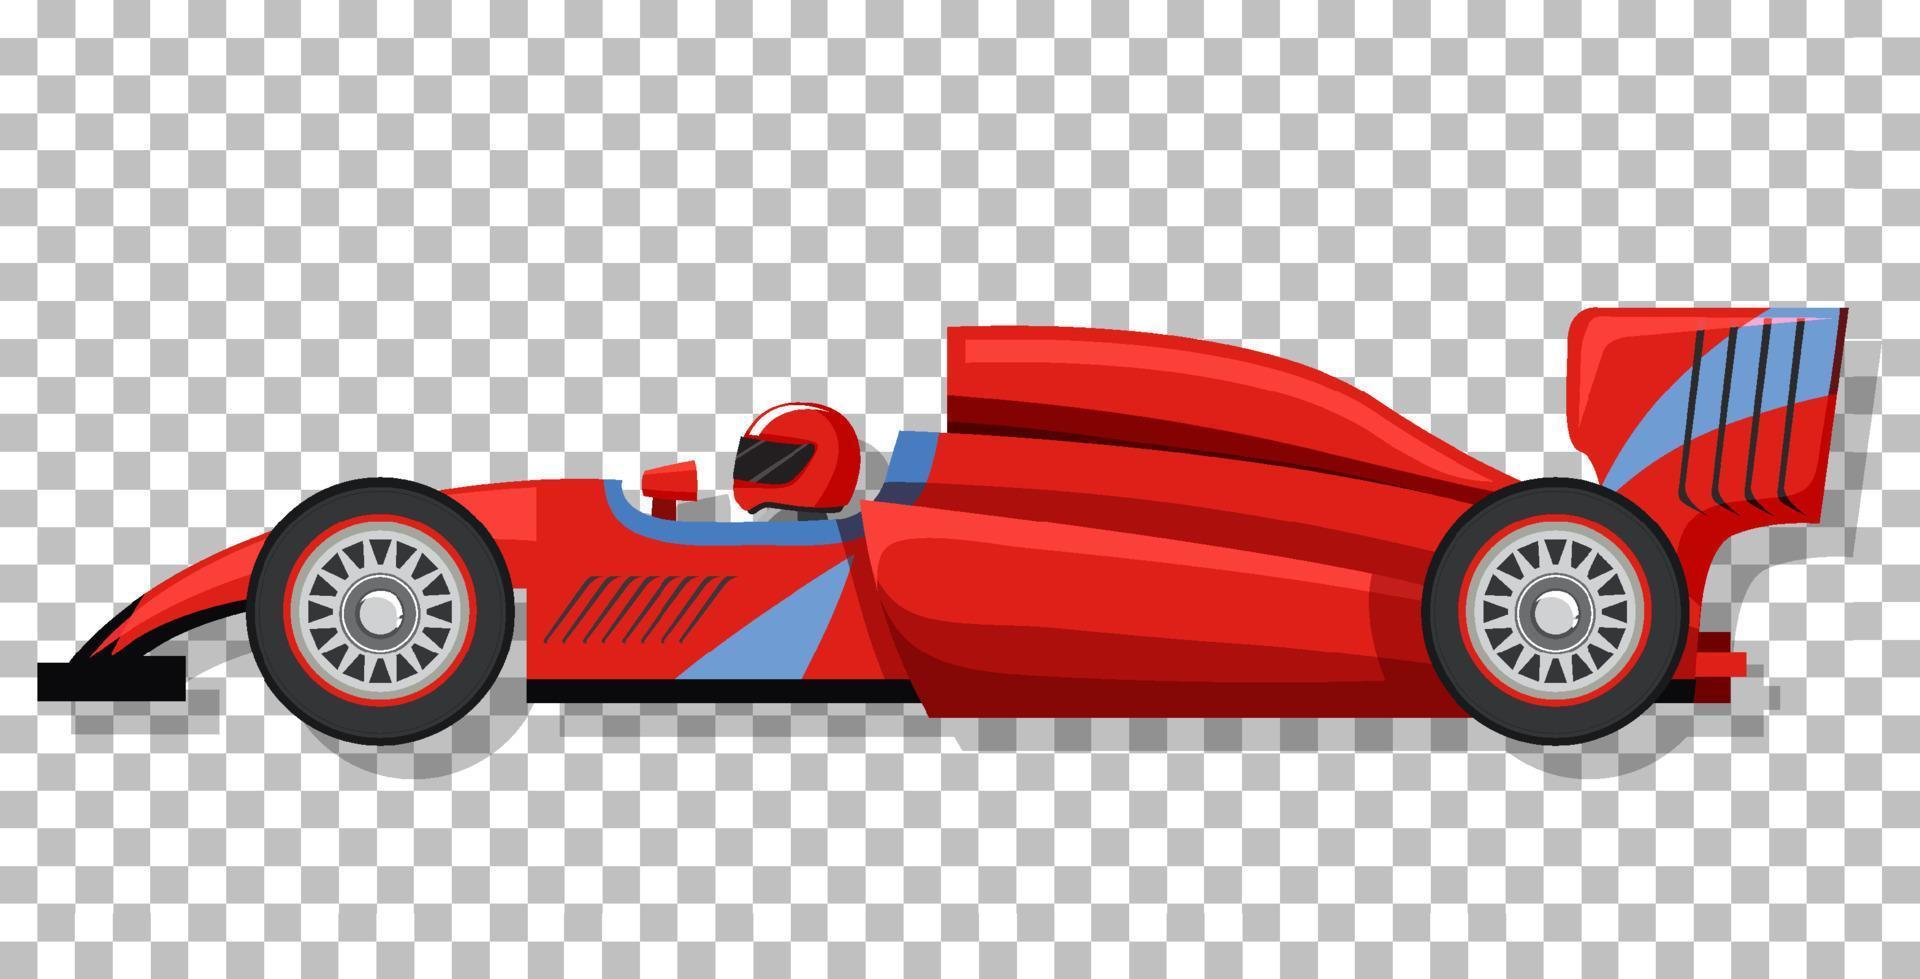 A racing car on grid background vector